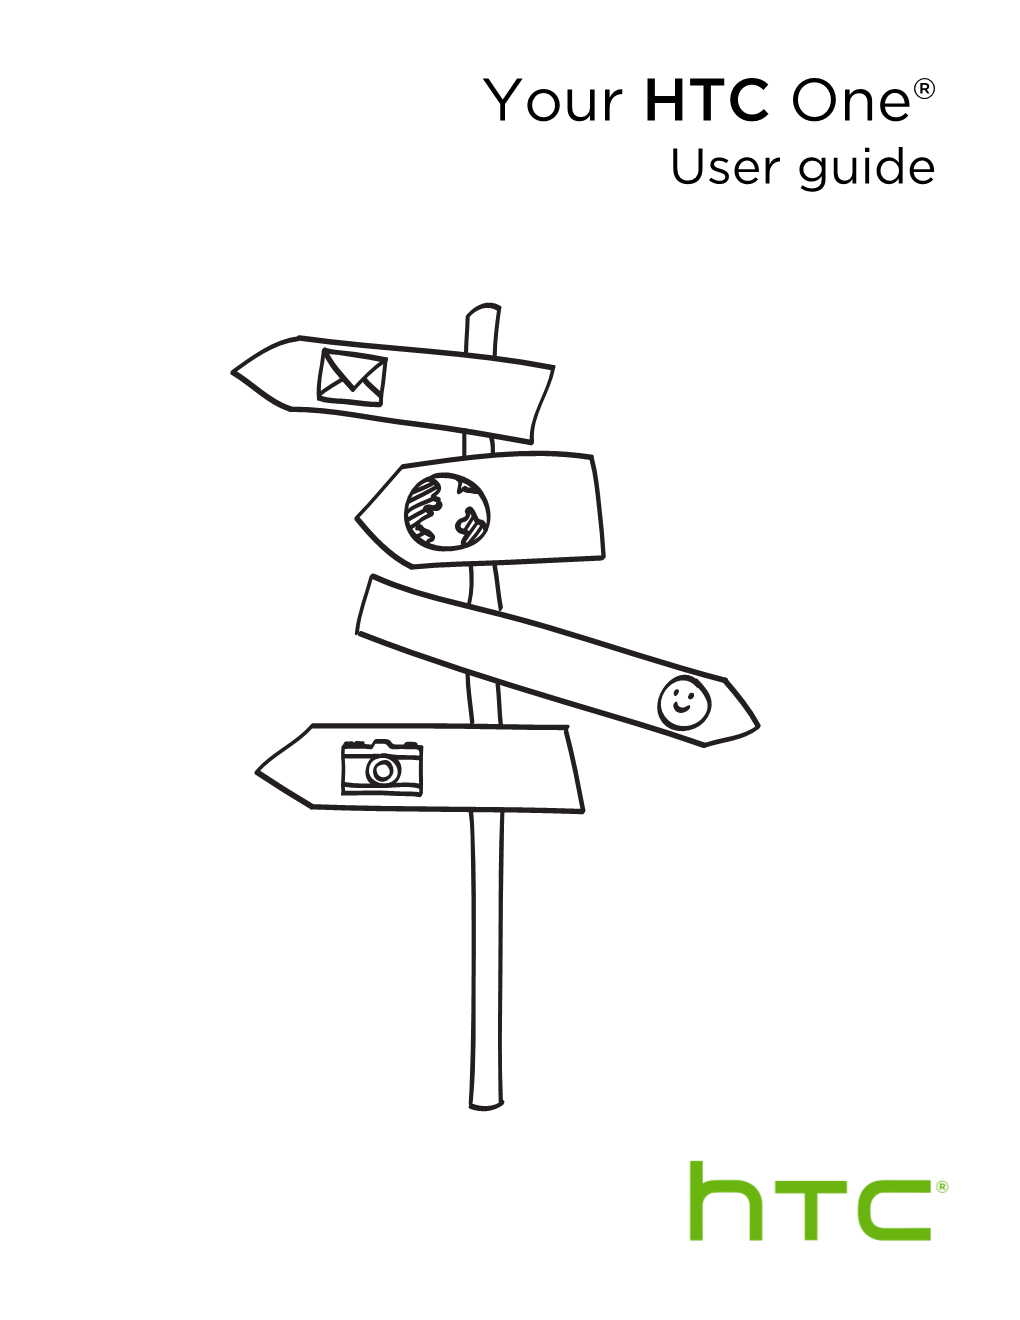 Your HTC One® User Guide 2 Contents Contents